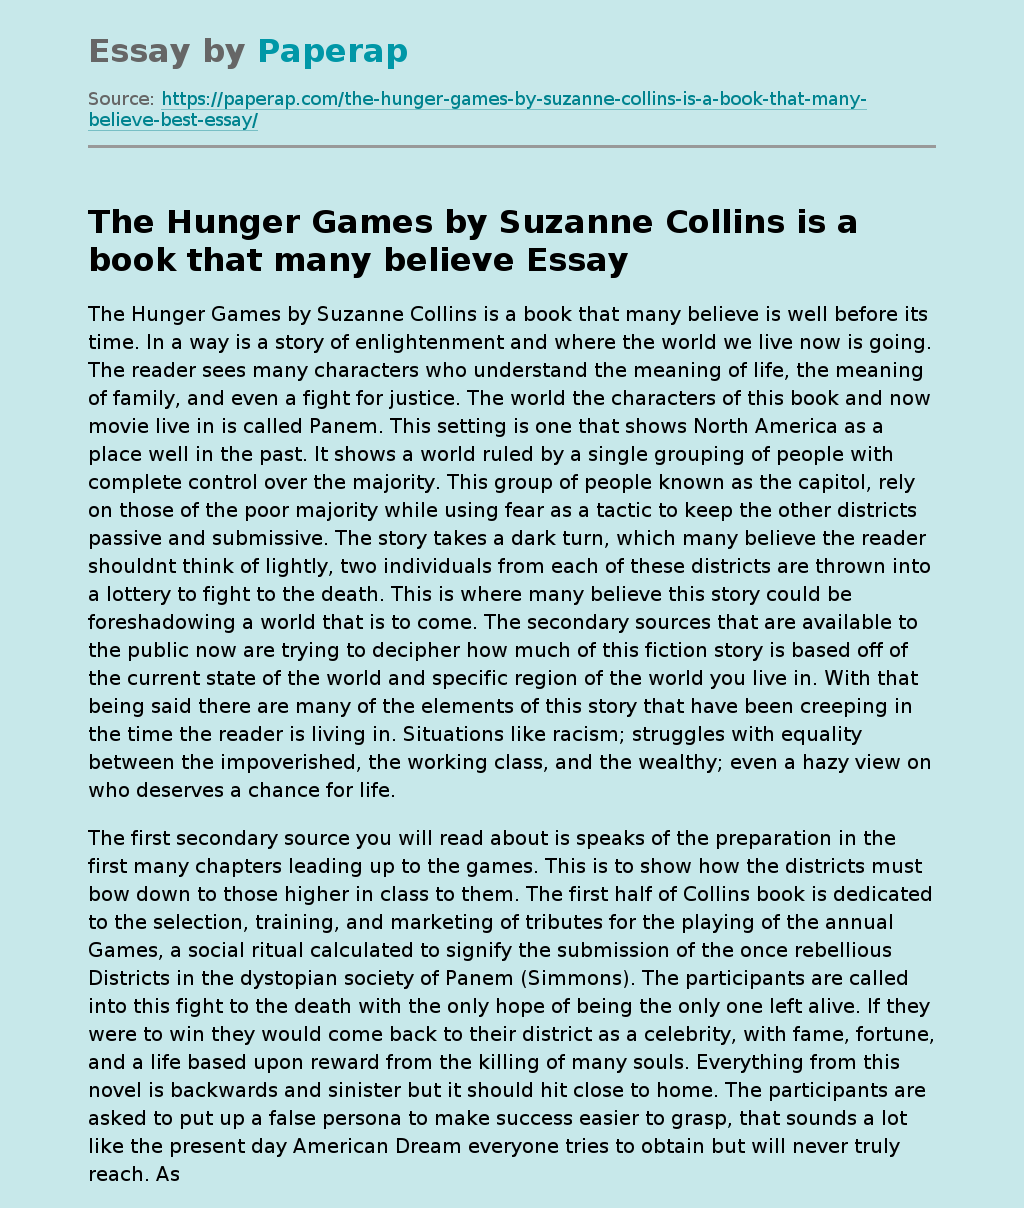 The Hunger Games by Suzanne Collins is a book that many believe